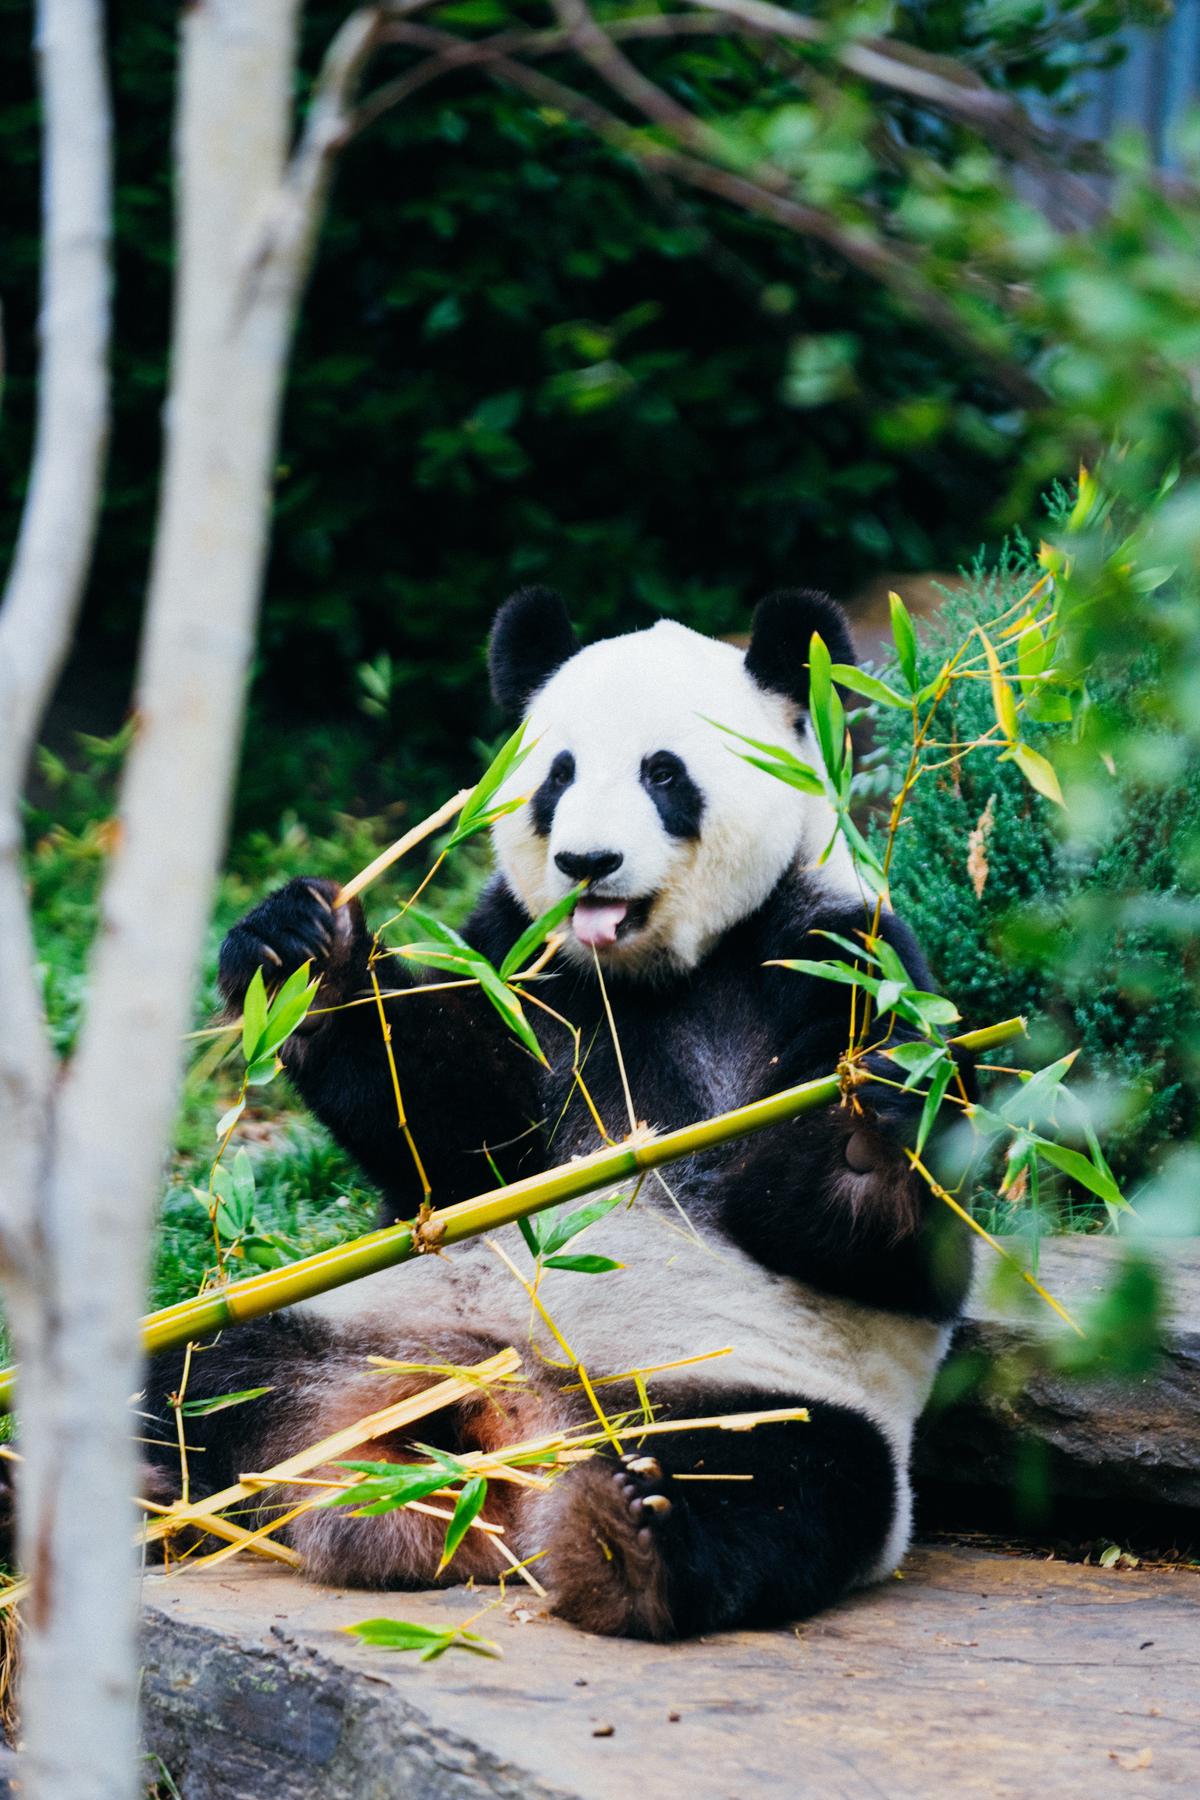 Yuan Zi, a charming panda at Beauval Zoo, beloved by many for his chubby appearance and friendly demeanor.